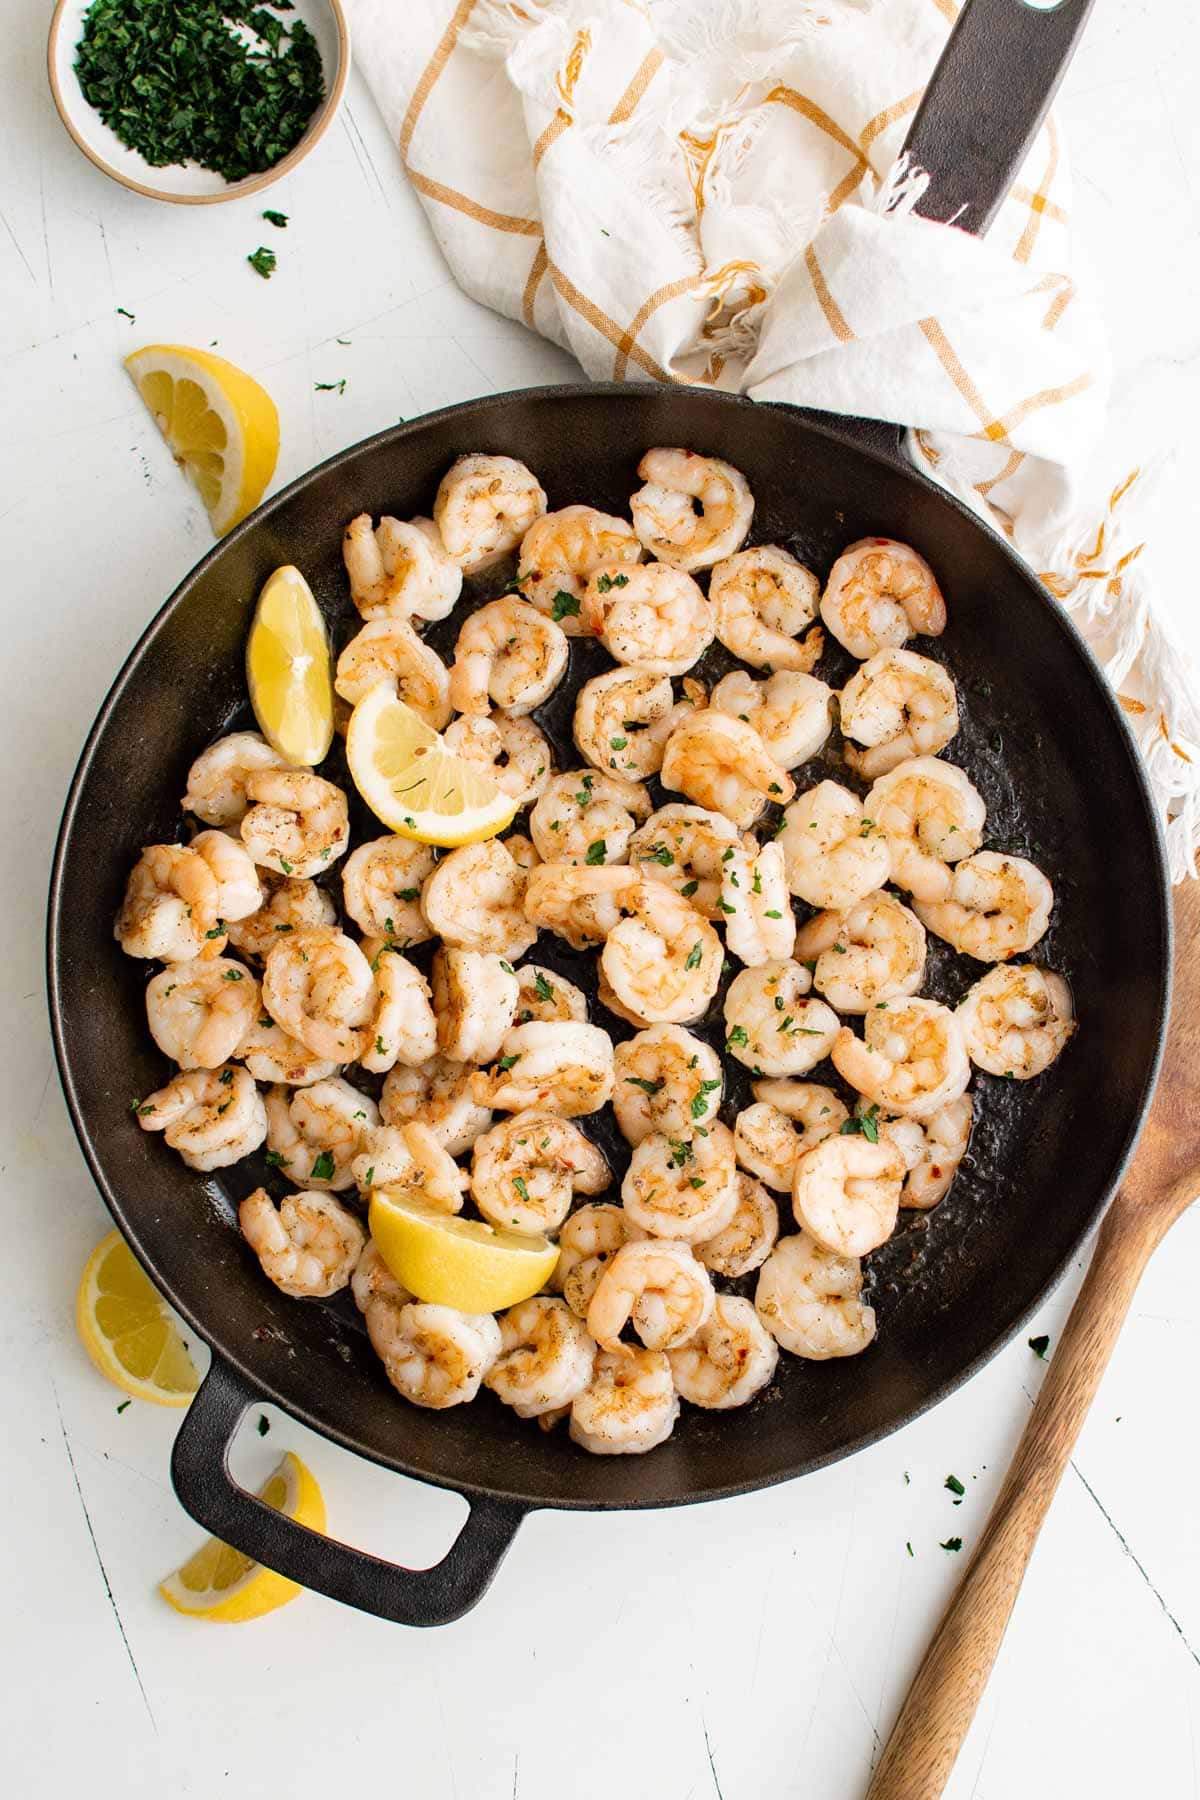 Pan seared shrimp in a large skillet, lemon wedges, a wooden spoon.